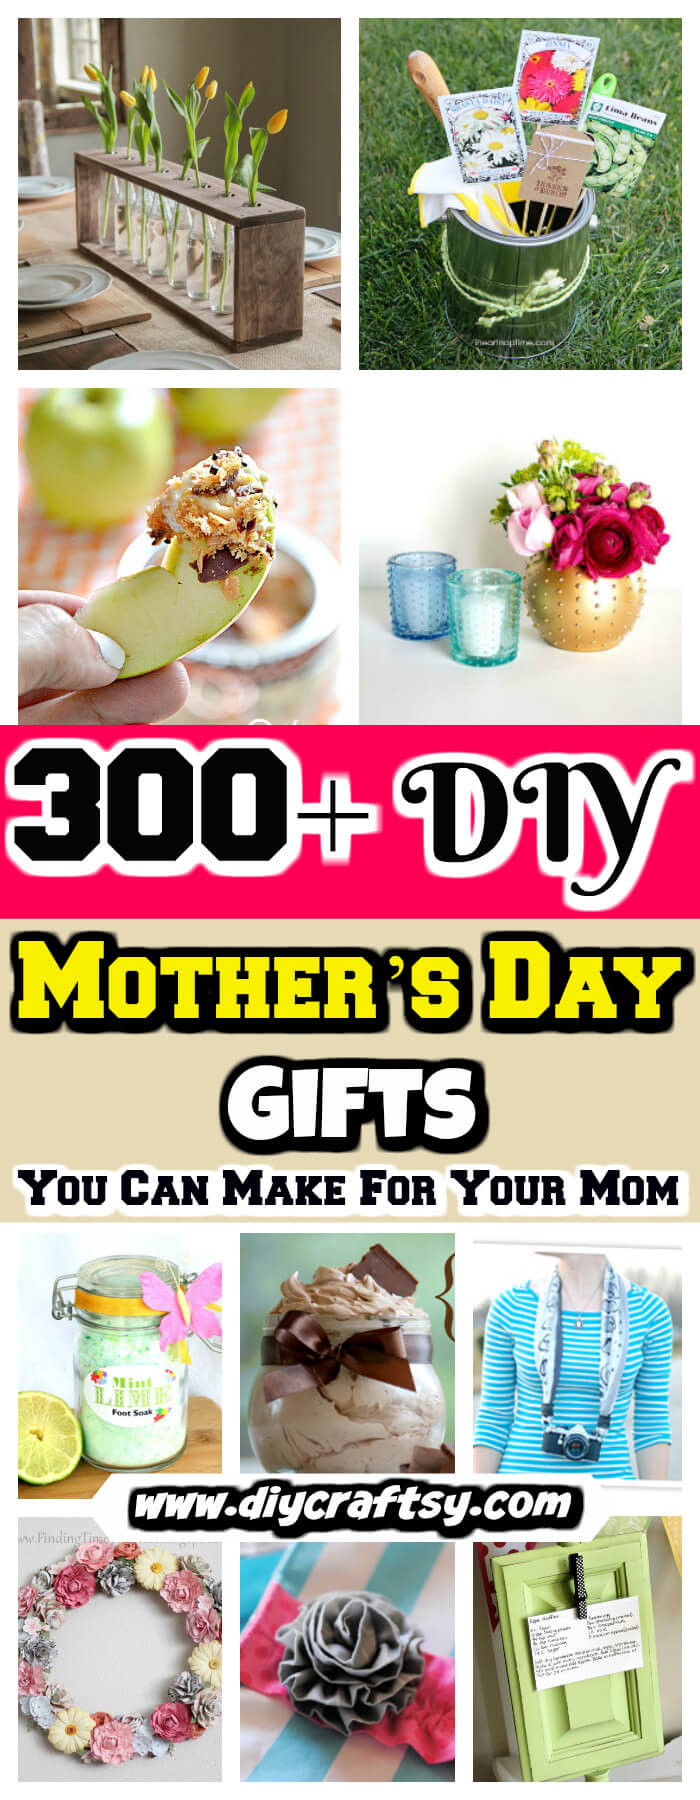 300+ DIY Mothers Day Gifts You Can Make For Your Mom - DIY & Crafts